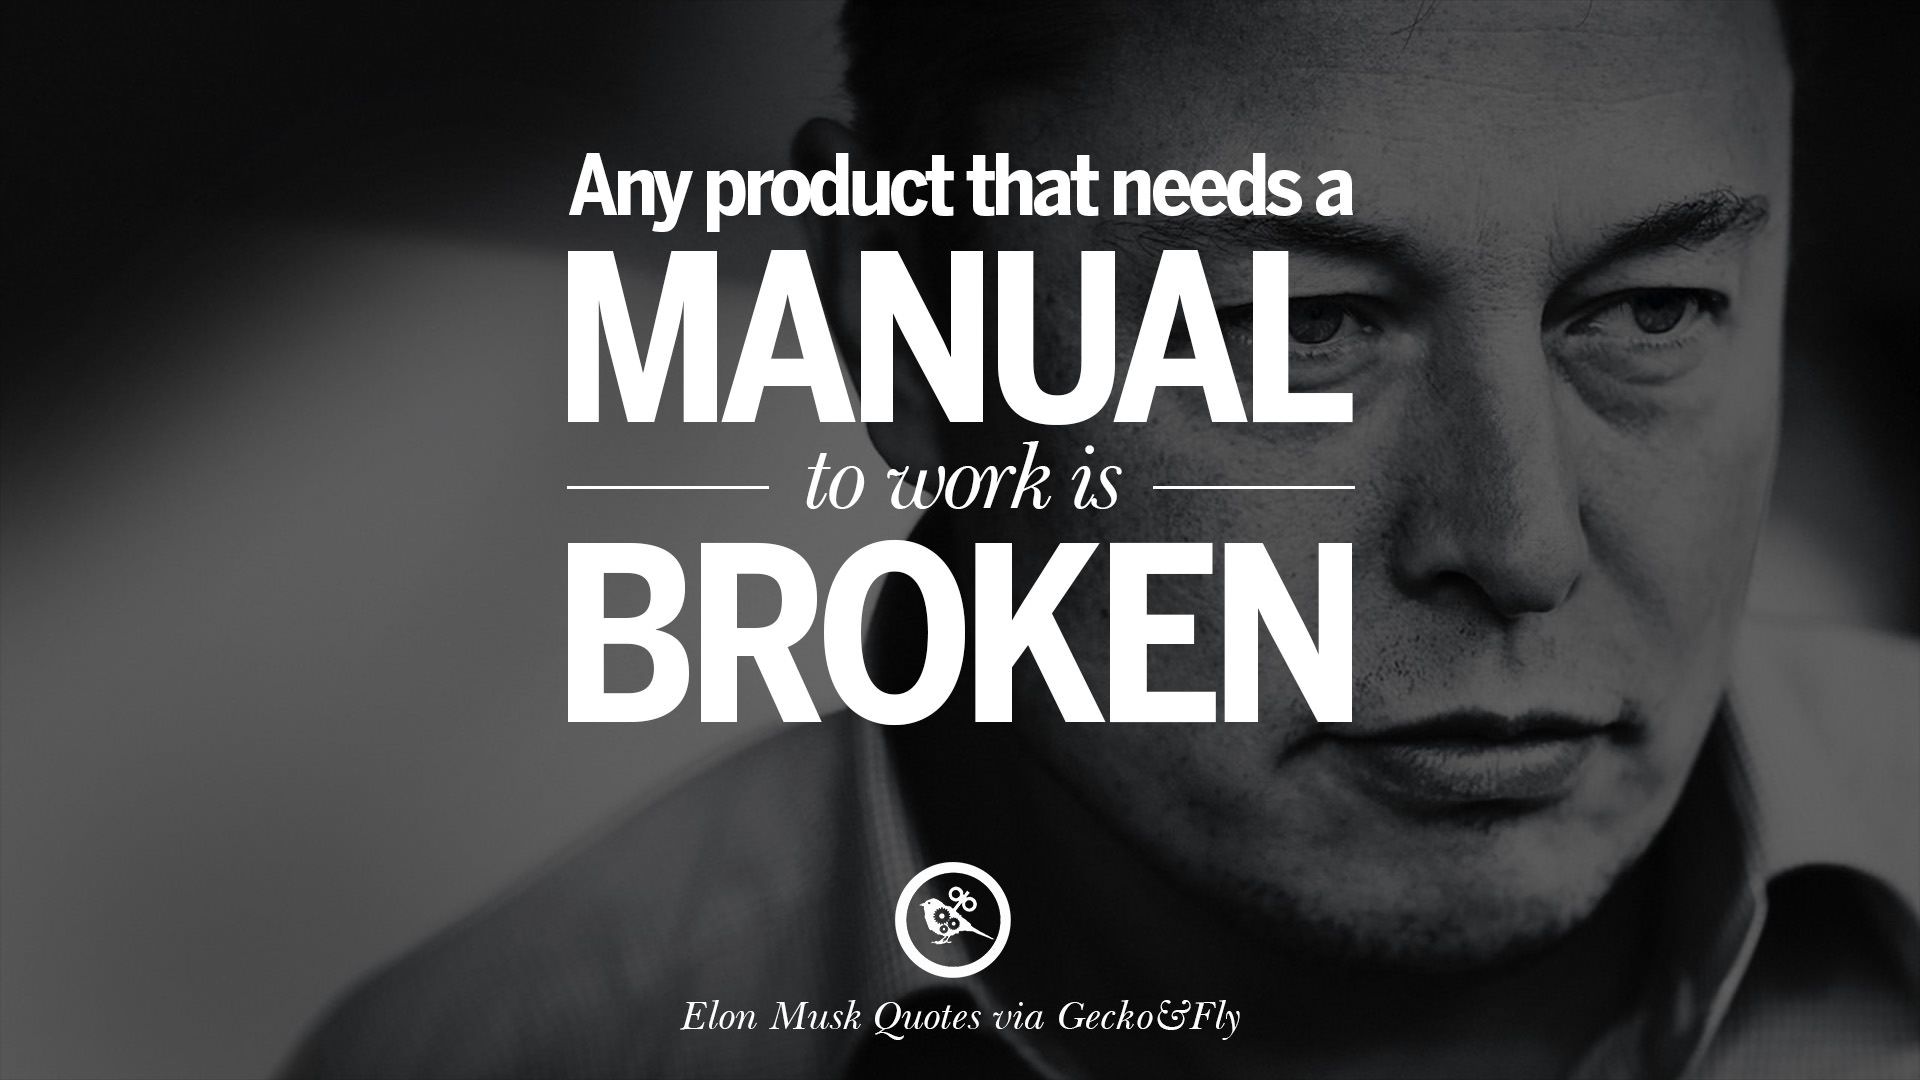 Elon Musk Quotes on Business, Risk and The Future